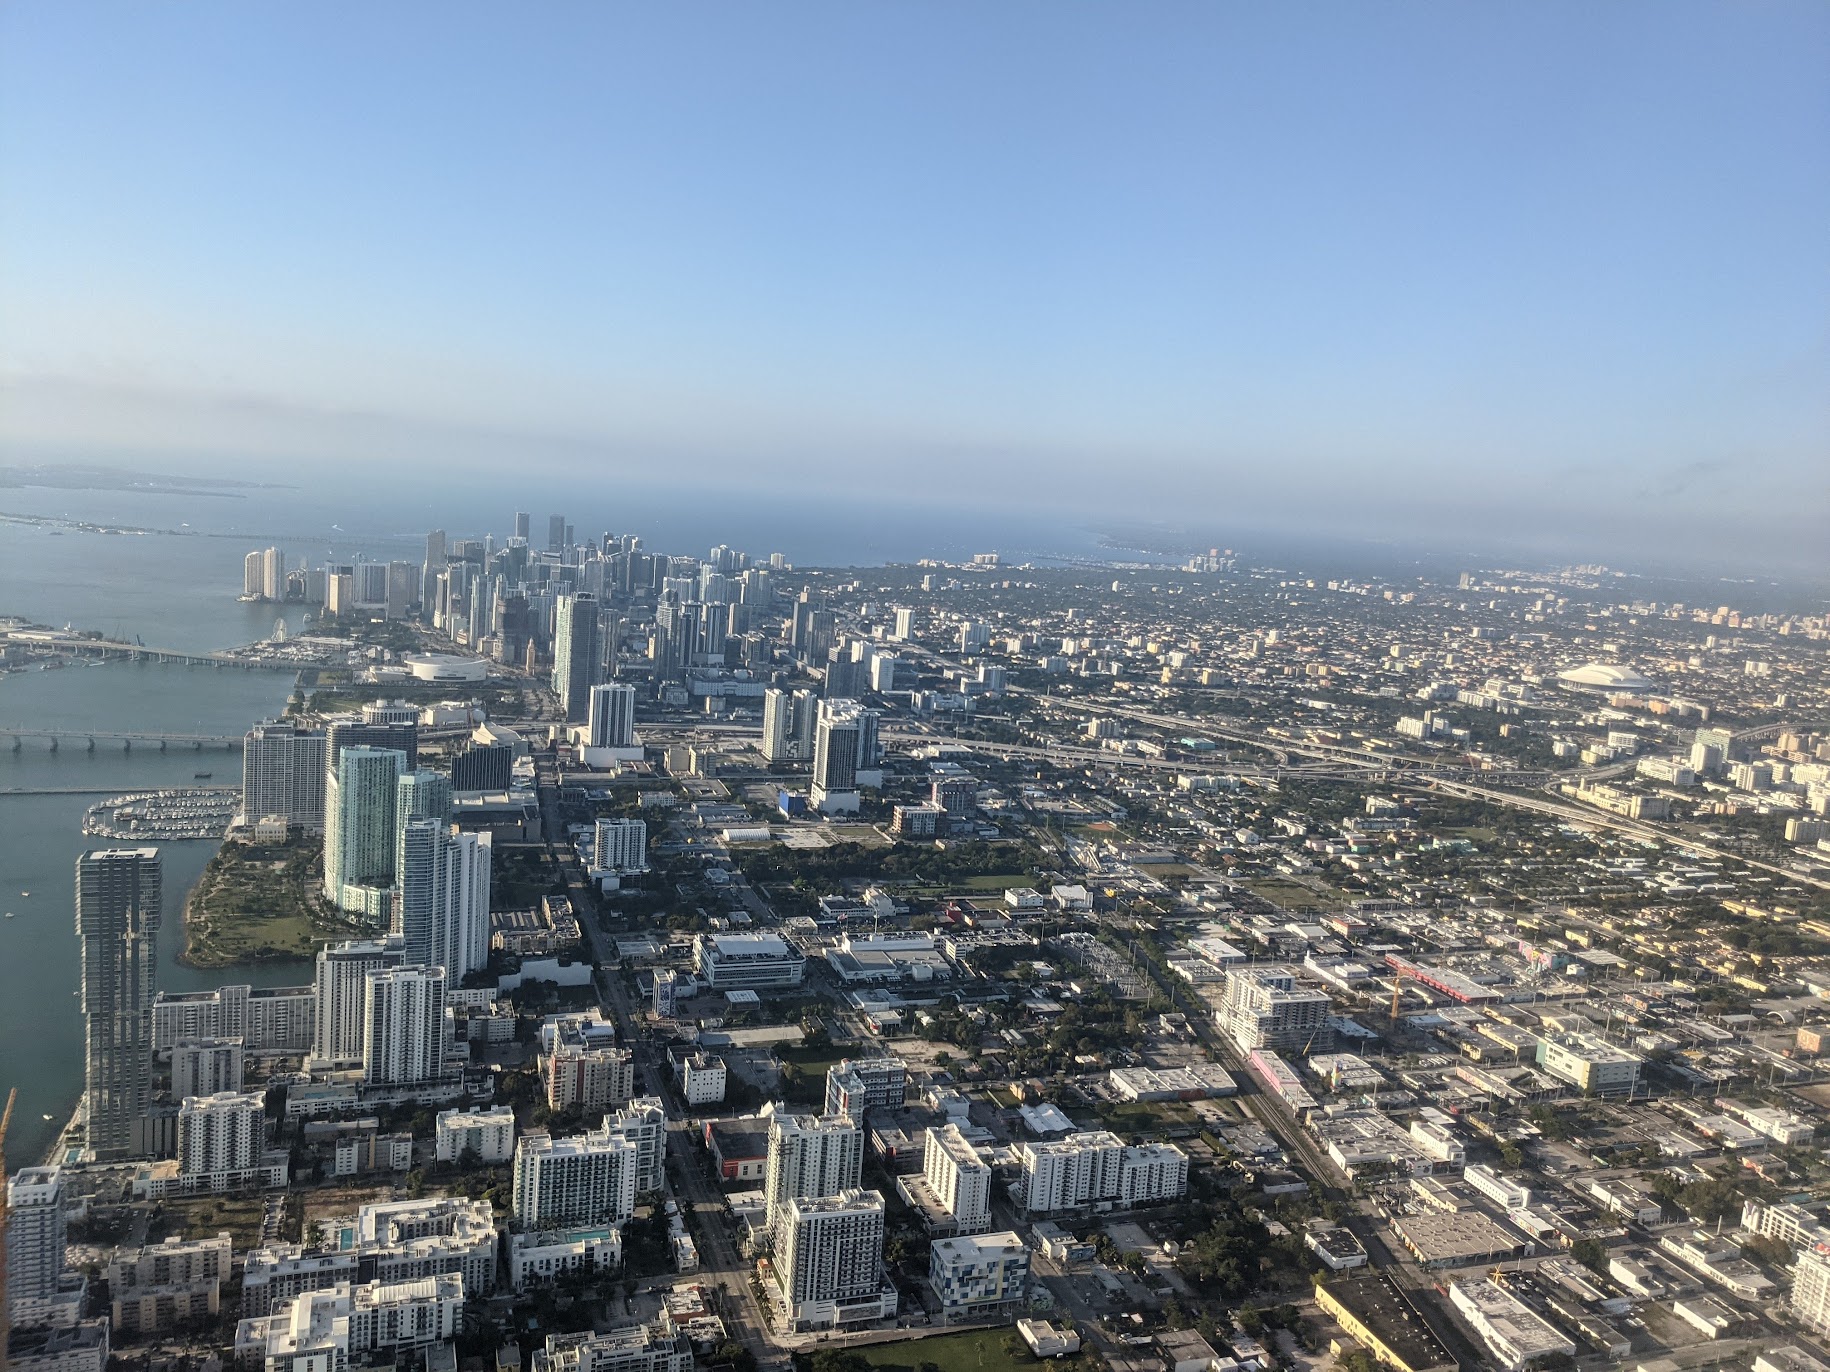 Miami Has Now Become ‘The Most Important City In America,’ FT Says